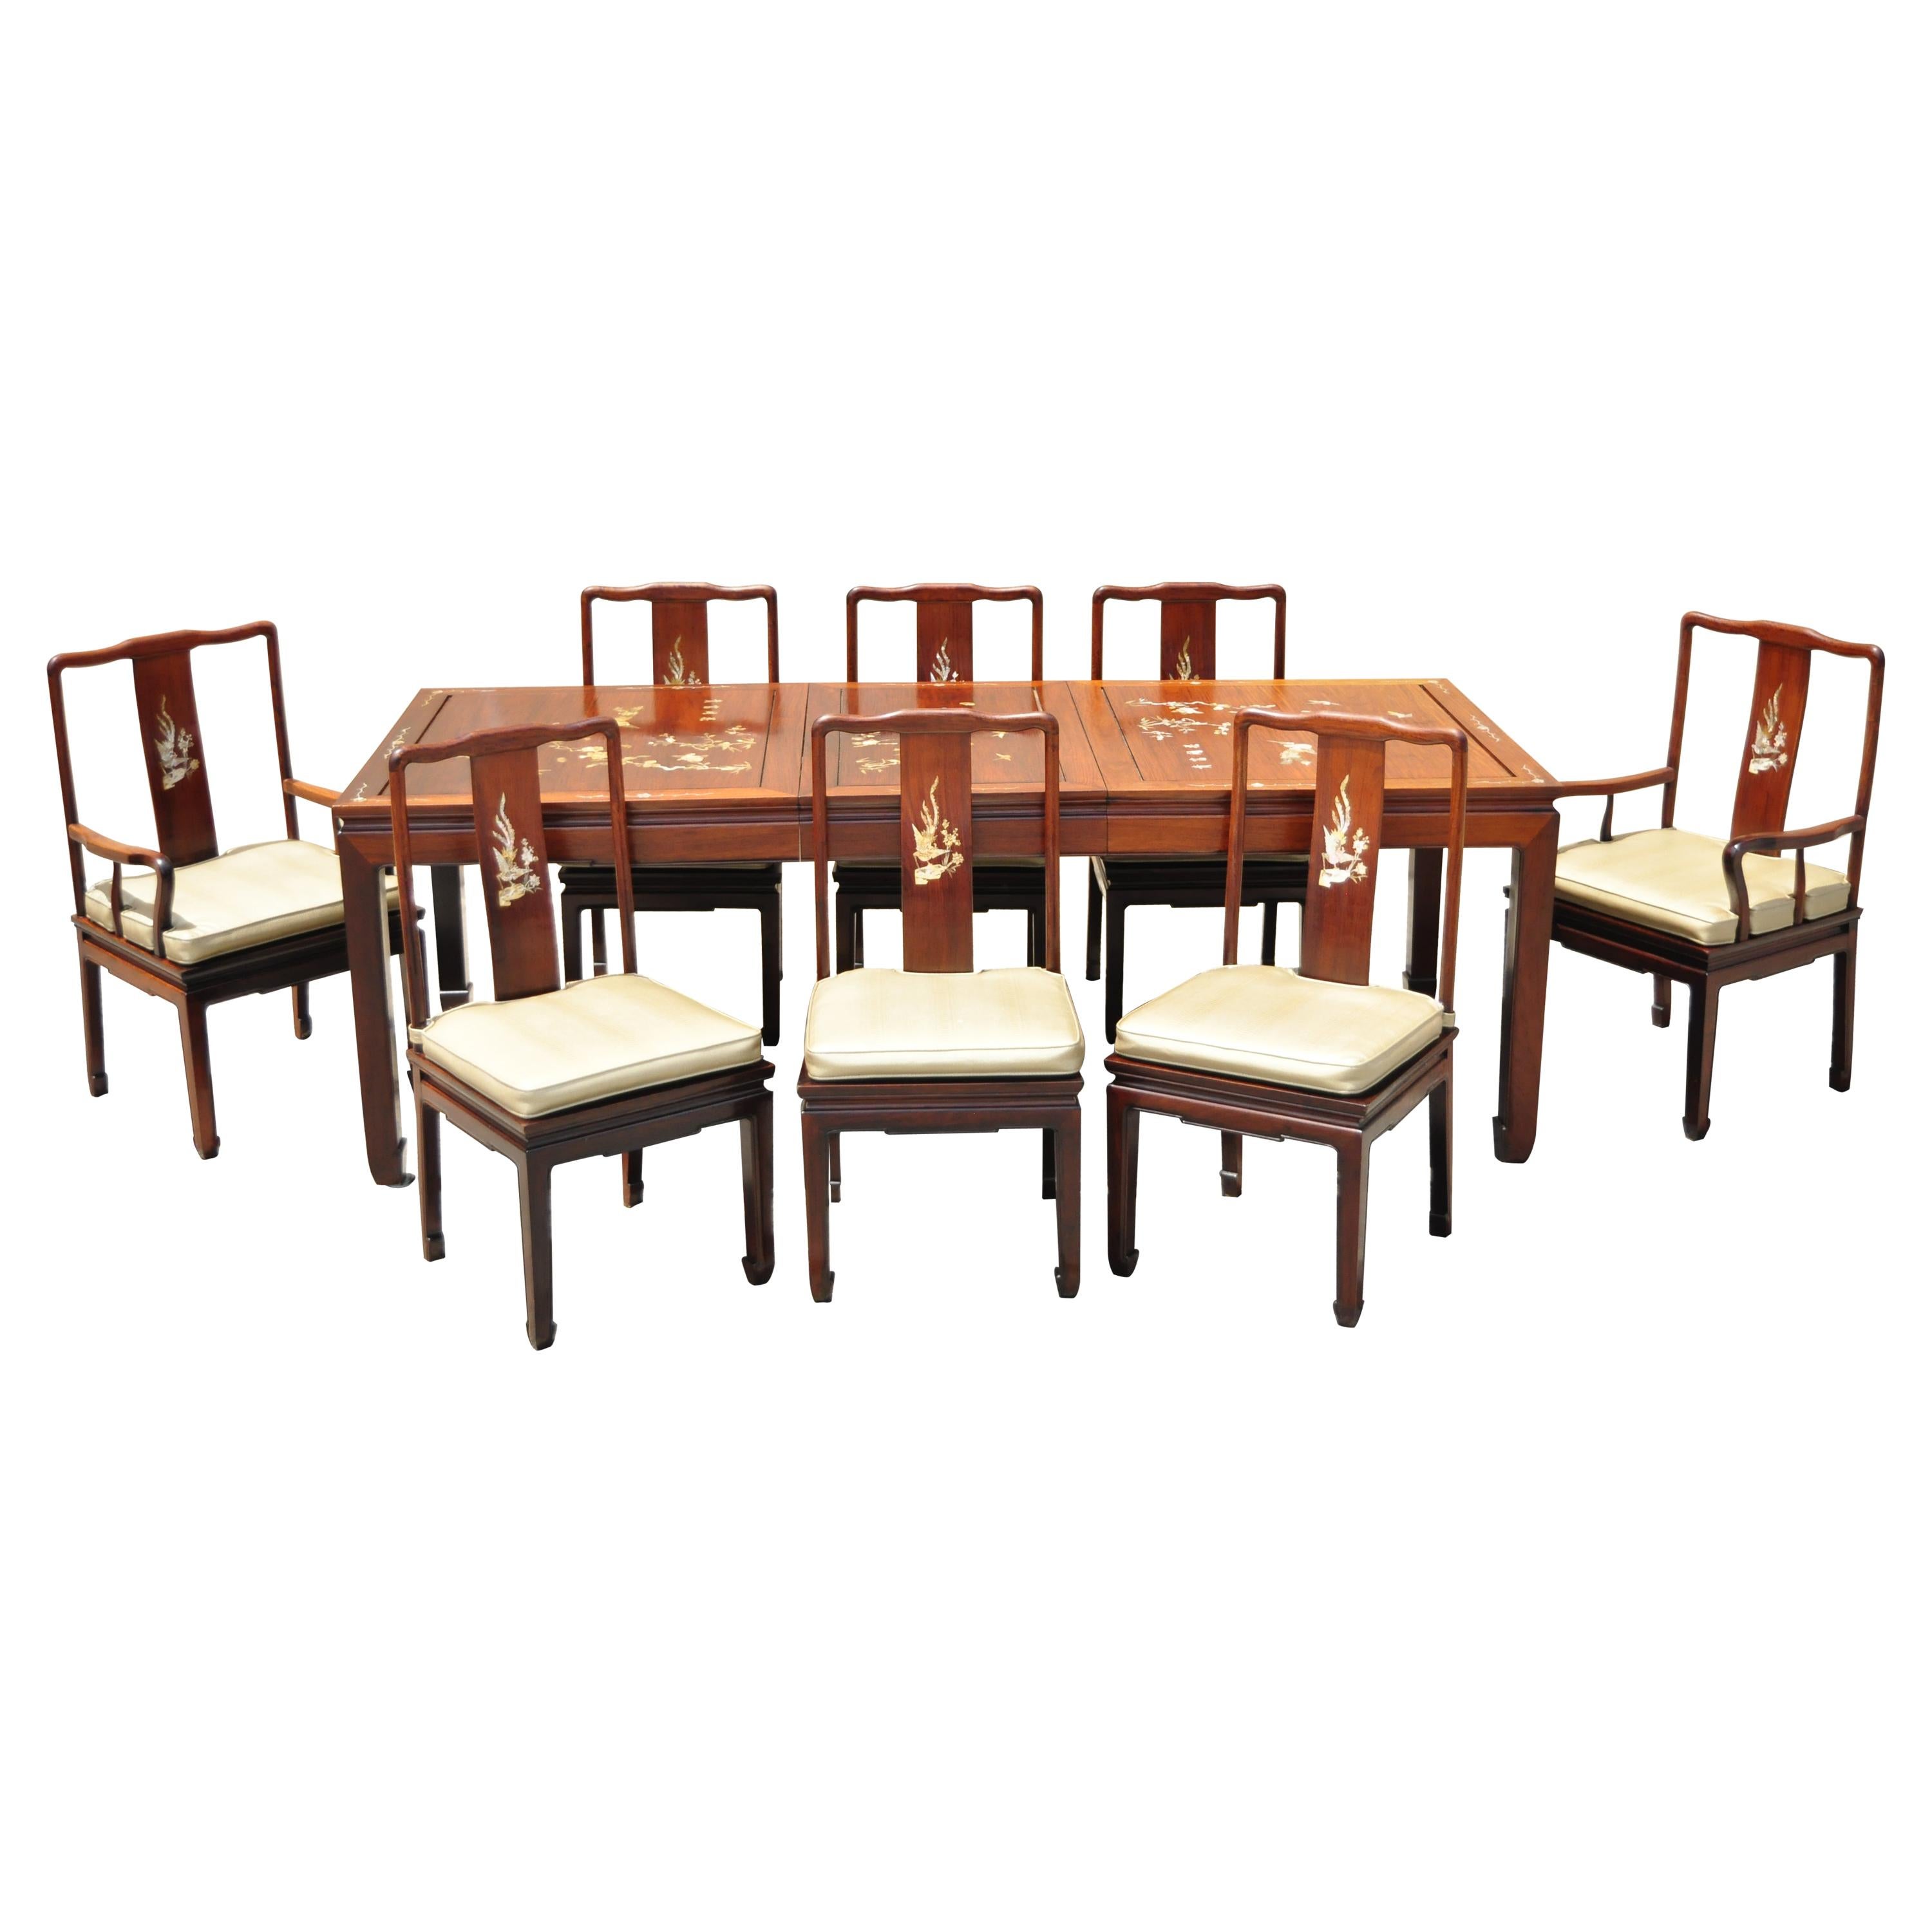 Chinese Rosewood Cherry Asian Dining Room Set Table 8 Chairs, 9pc Set